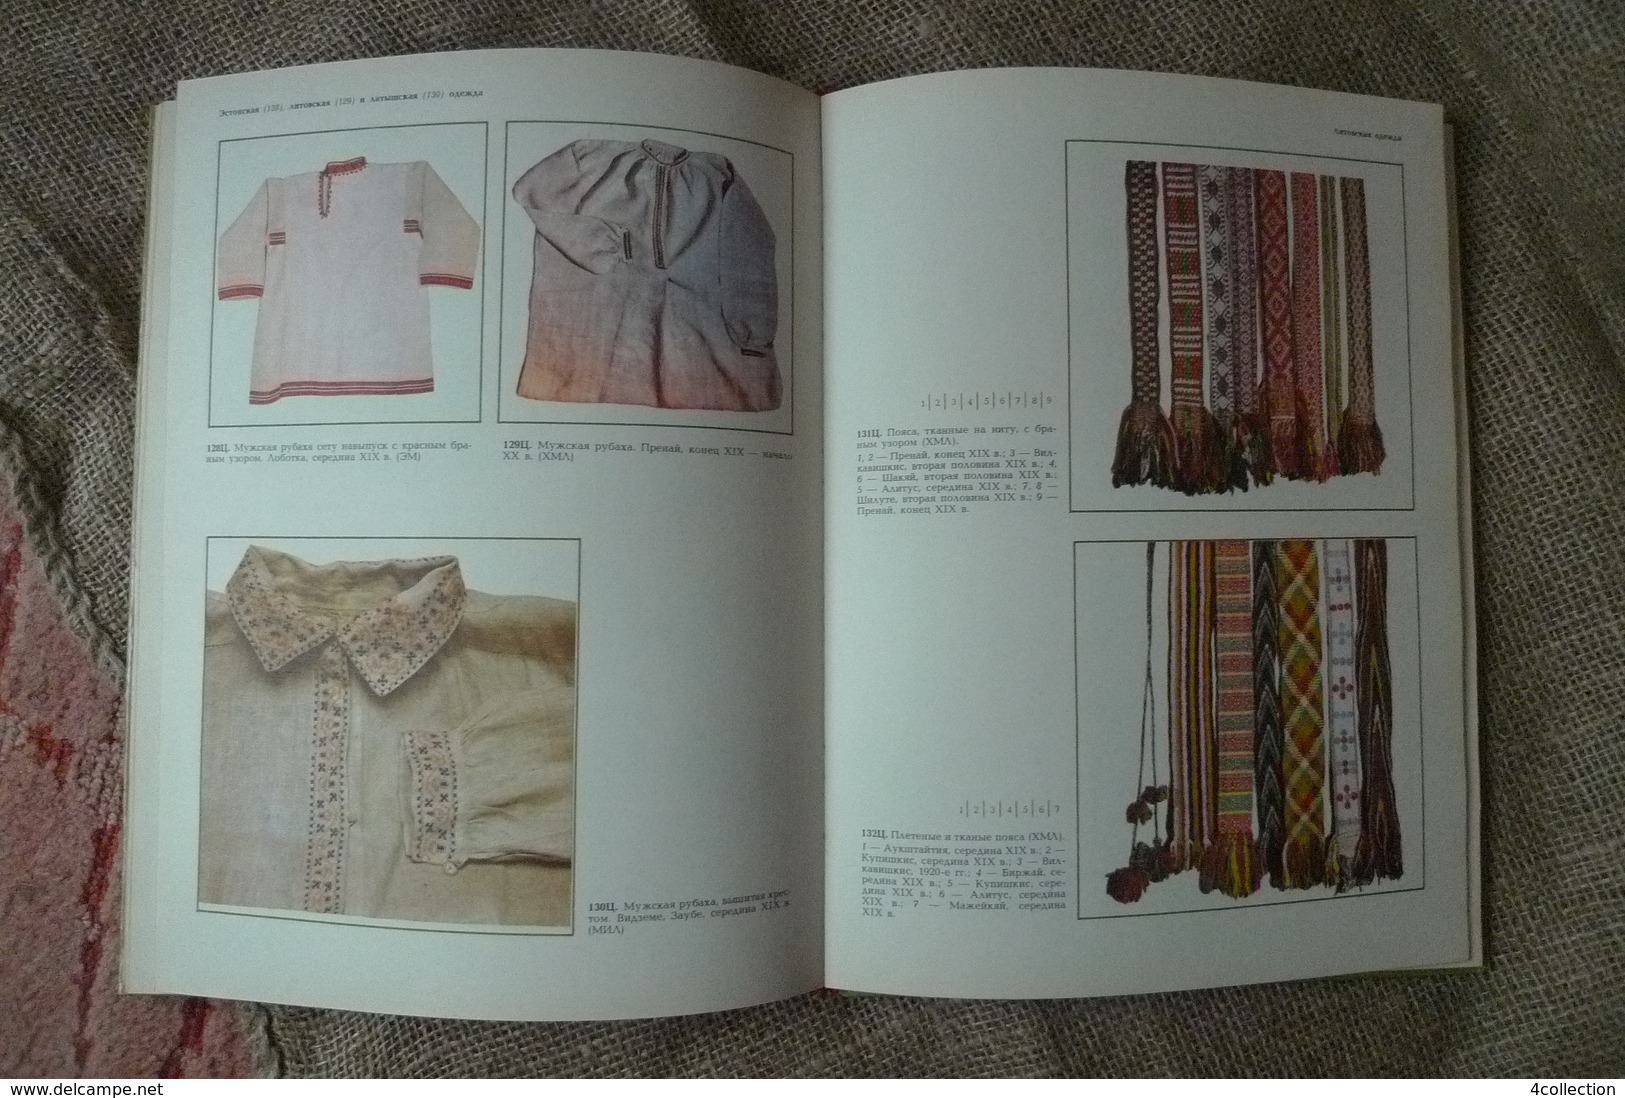 Latvia Riga 1986 Old Book illustrated Historical & Ethnographic Atlas of the Baltic States Traditional Costumes Clothes